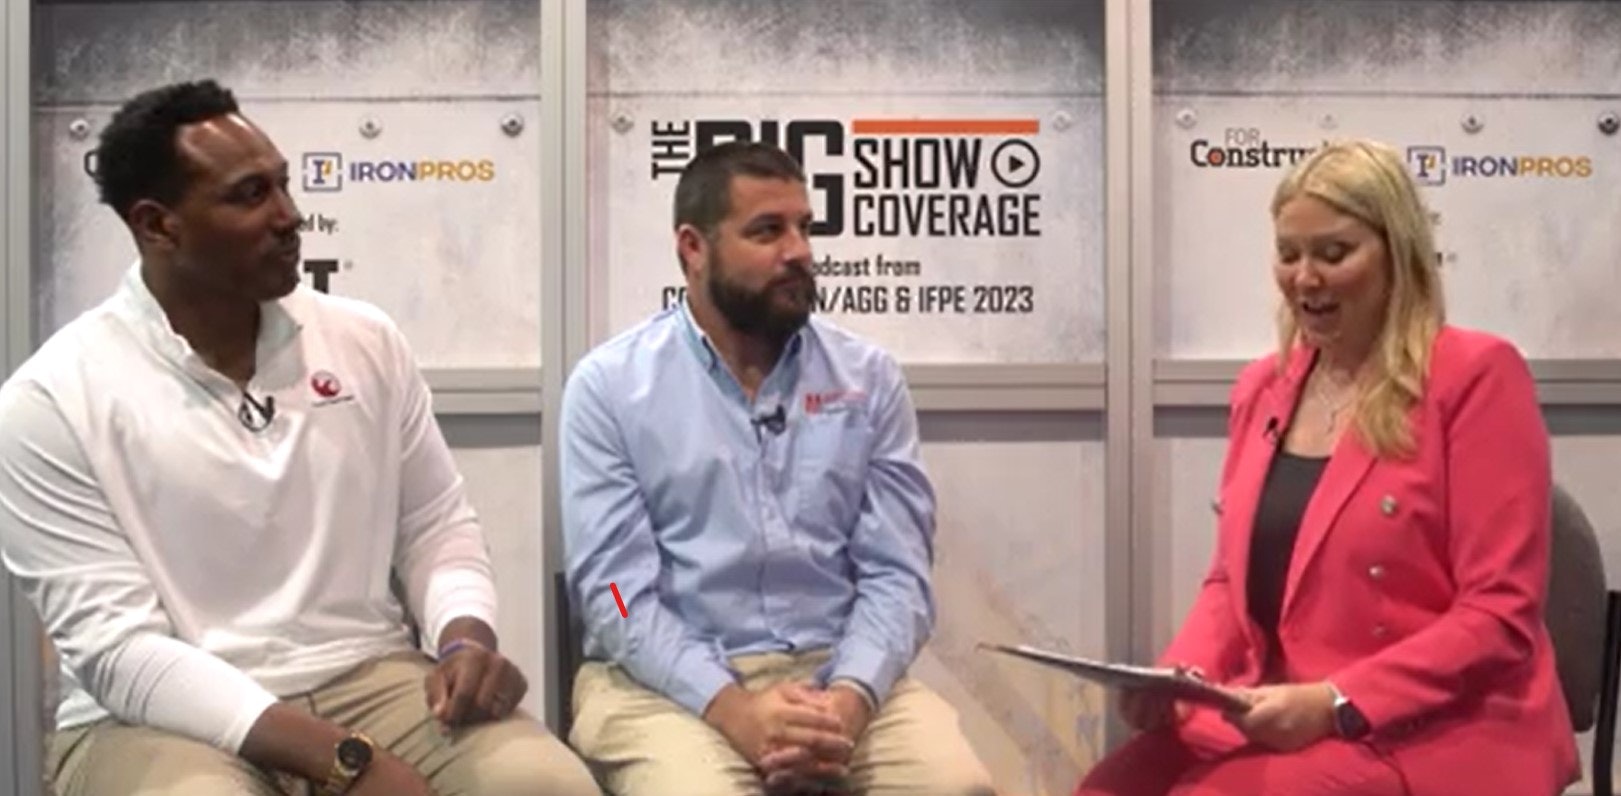 Earthwave VP talks about fleet management, telematics and job connectivity software at CONEXPO.